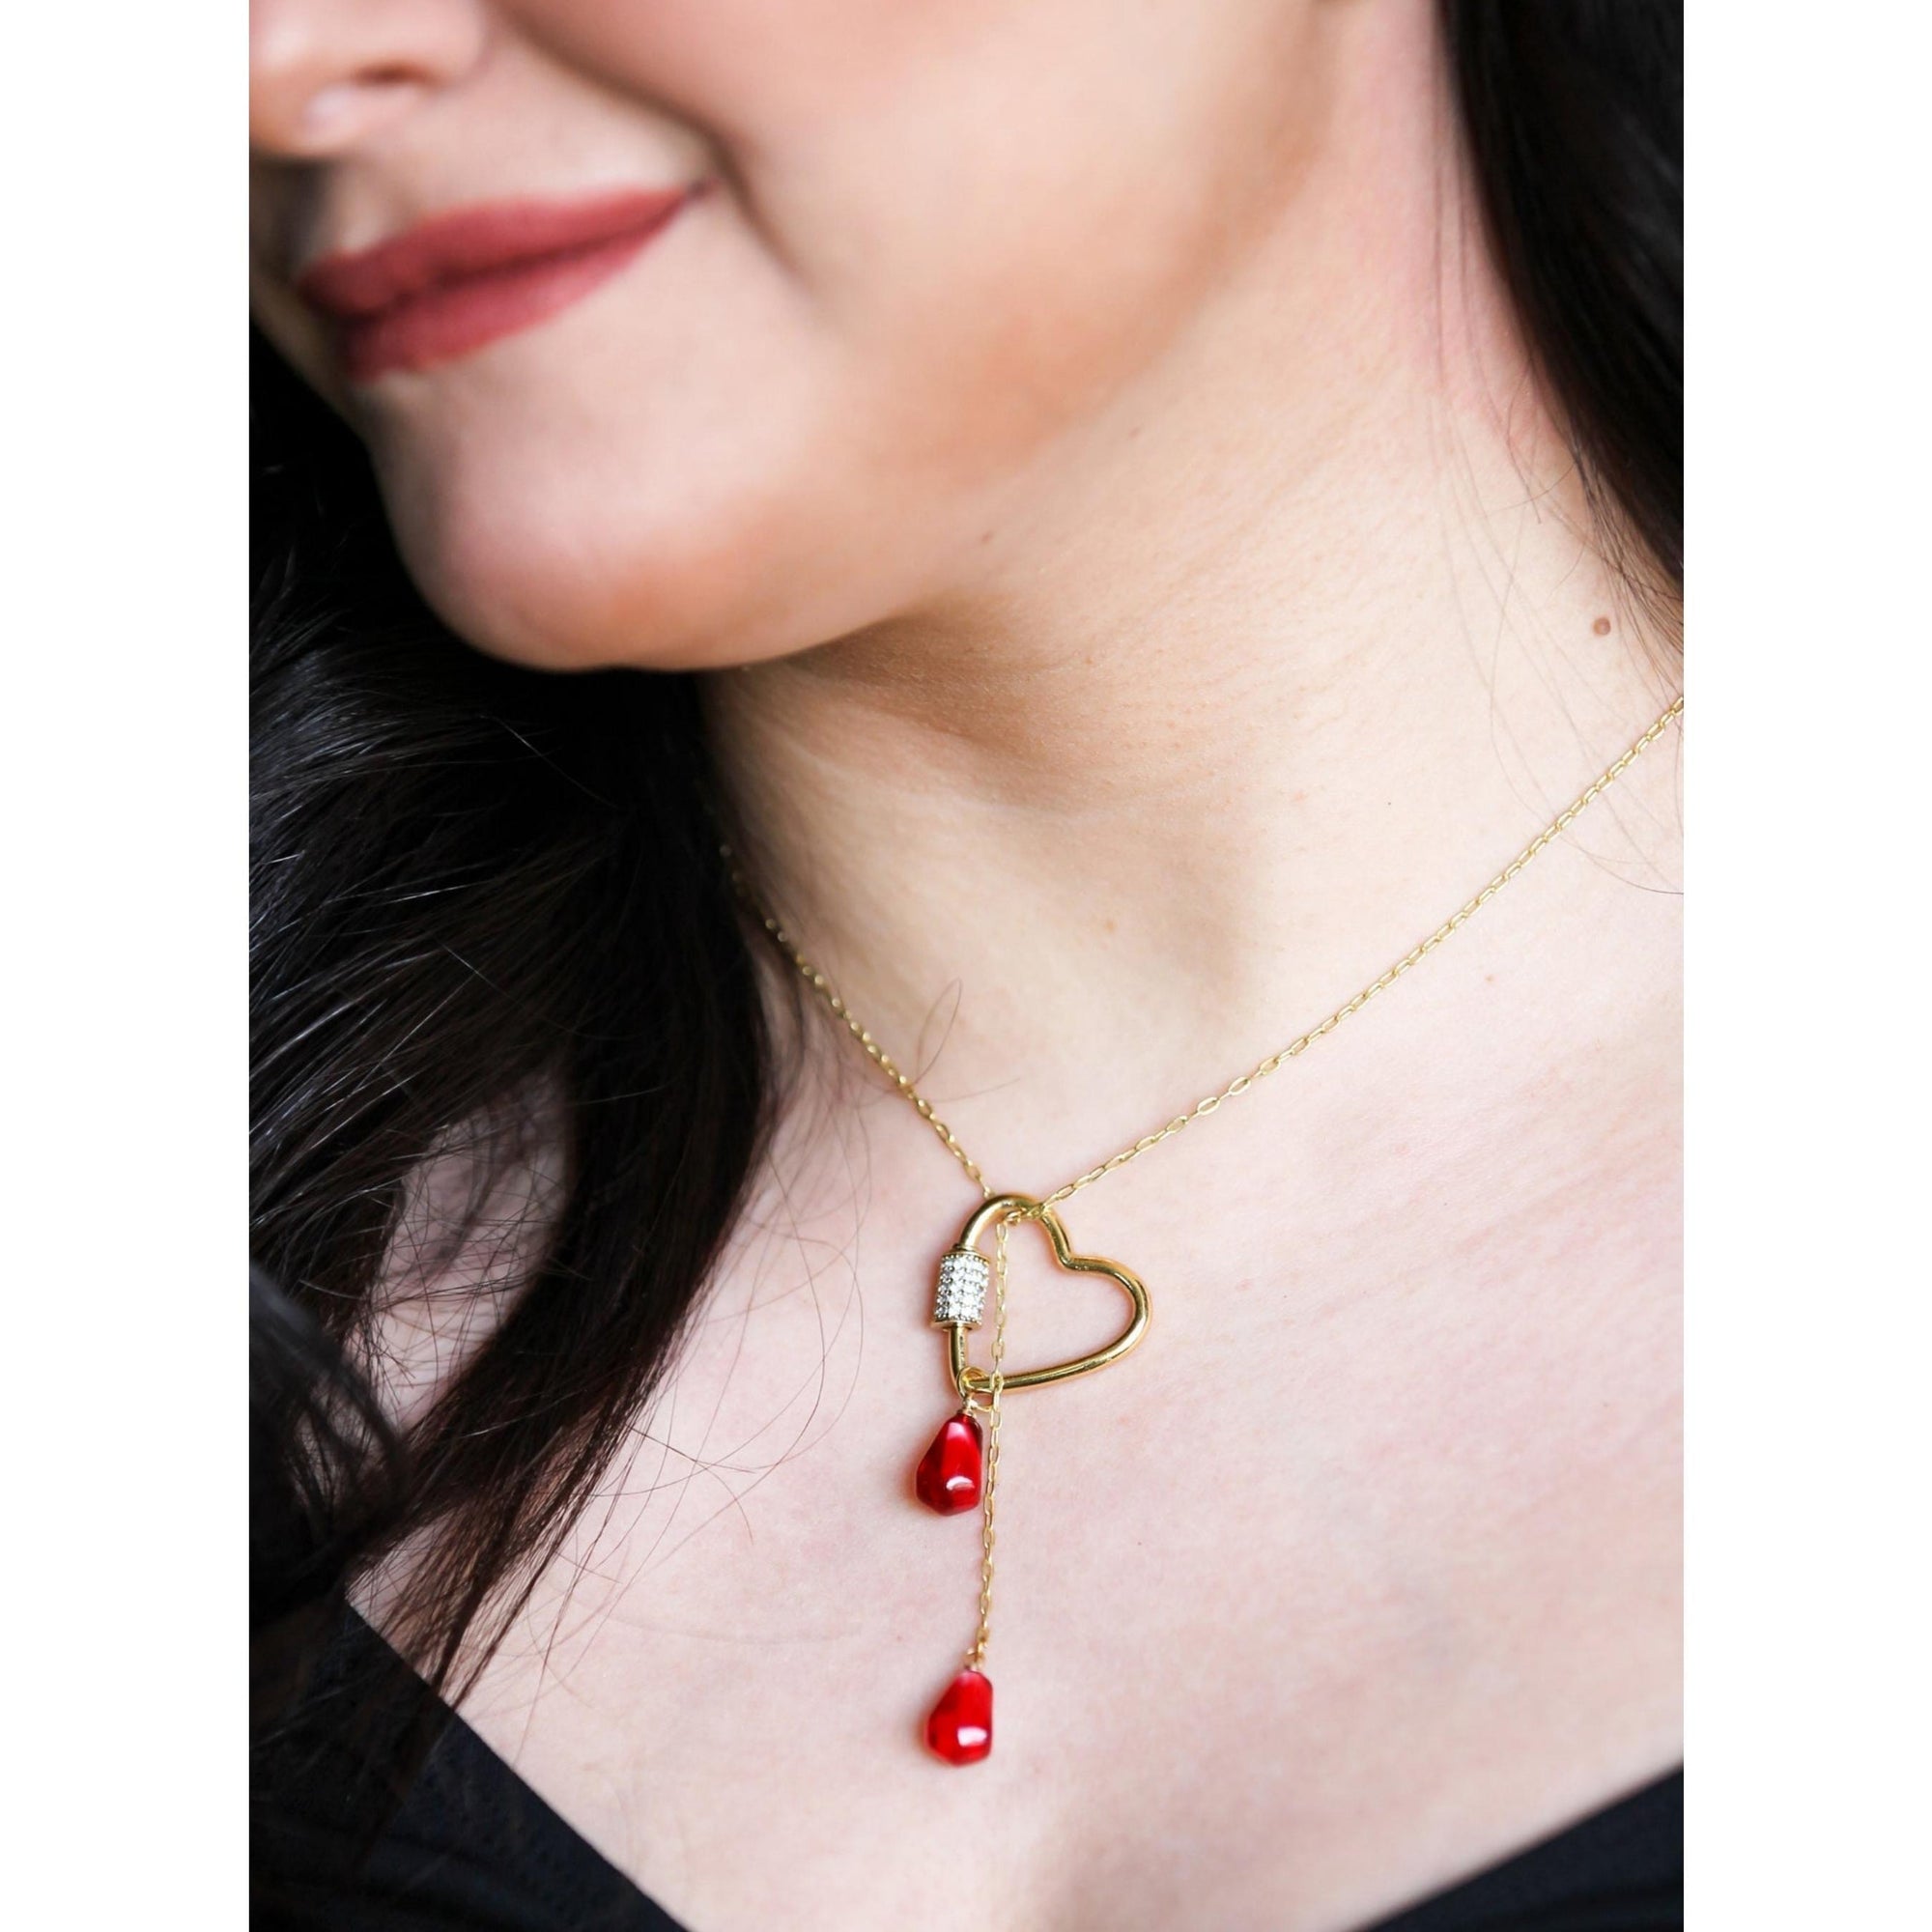 2 In 1 HEART POMEGRANATE NECKLACE